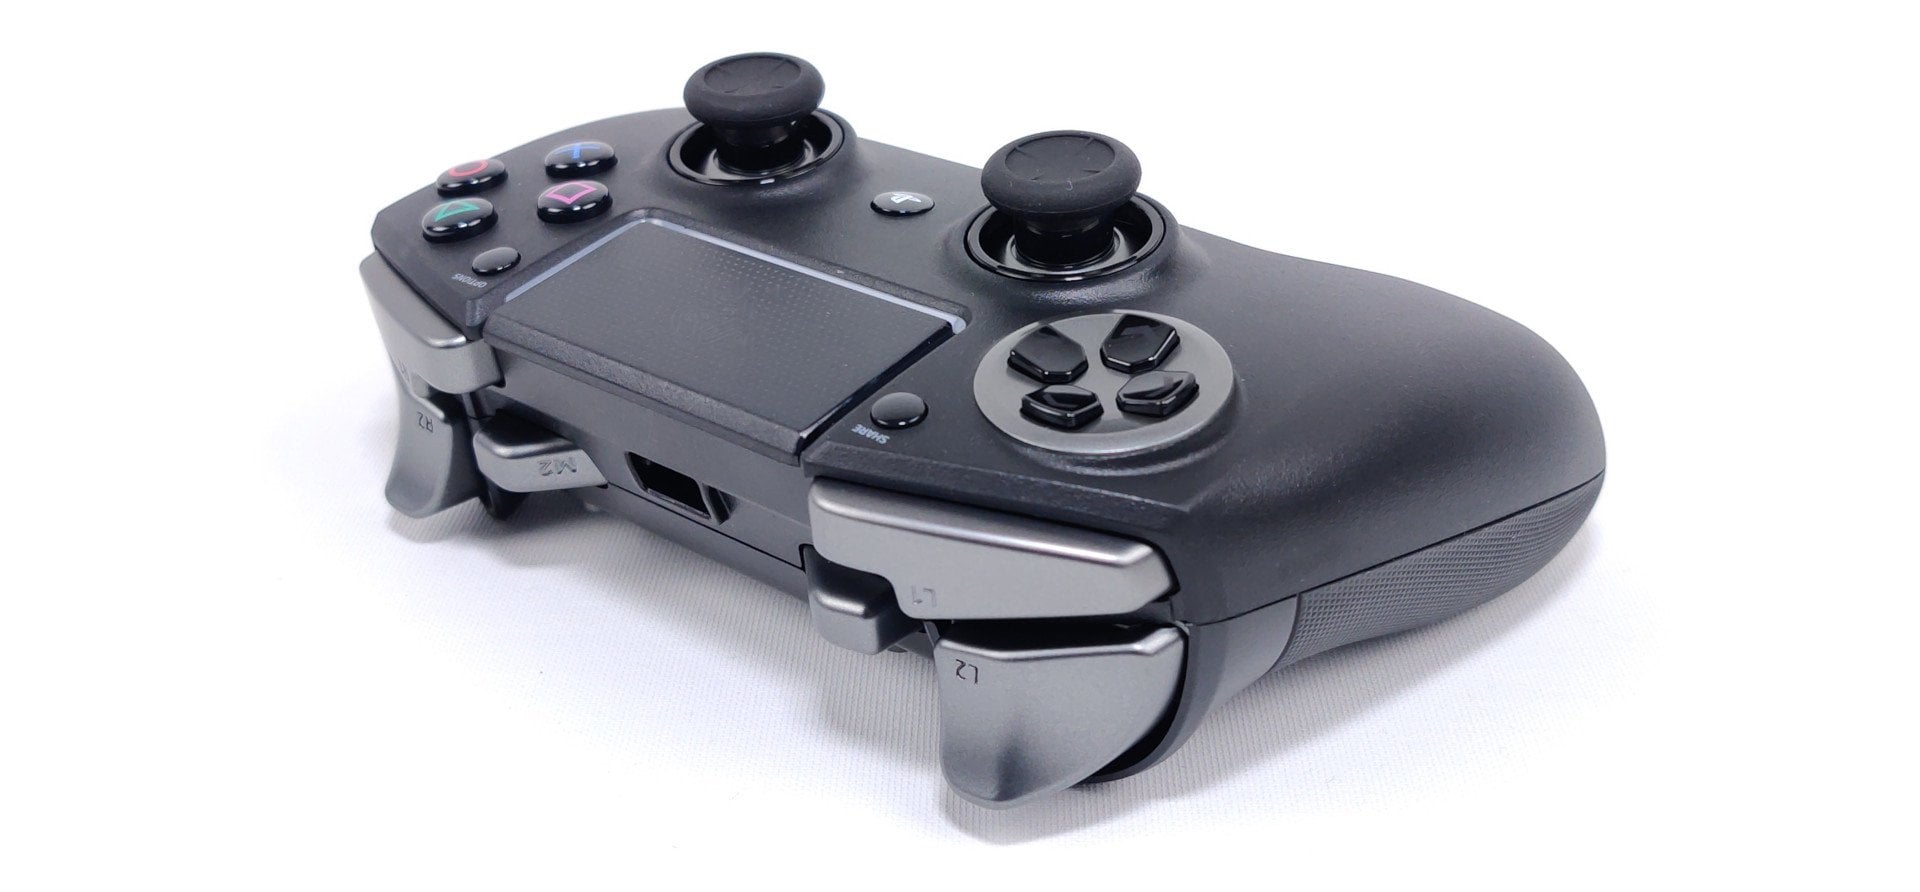 planter patroon glas Razer Raiju Ultimate put to the test - PS4 controller for pro gamers